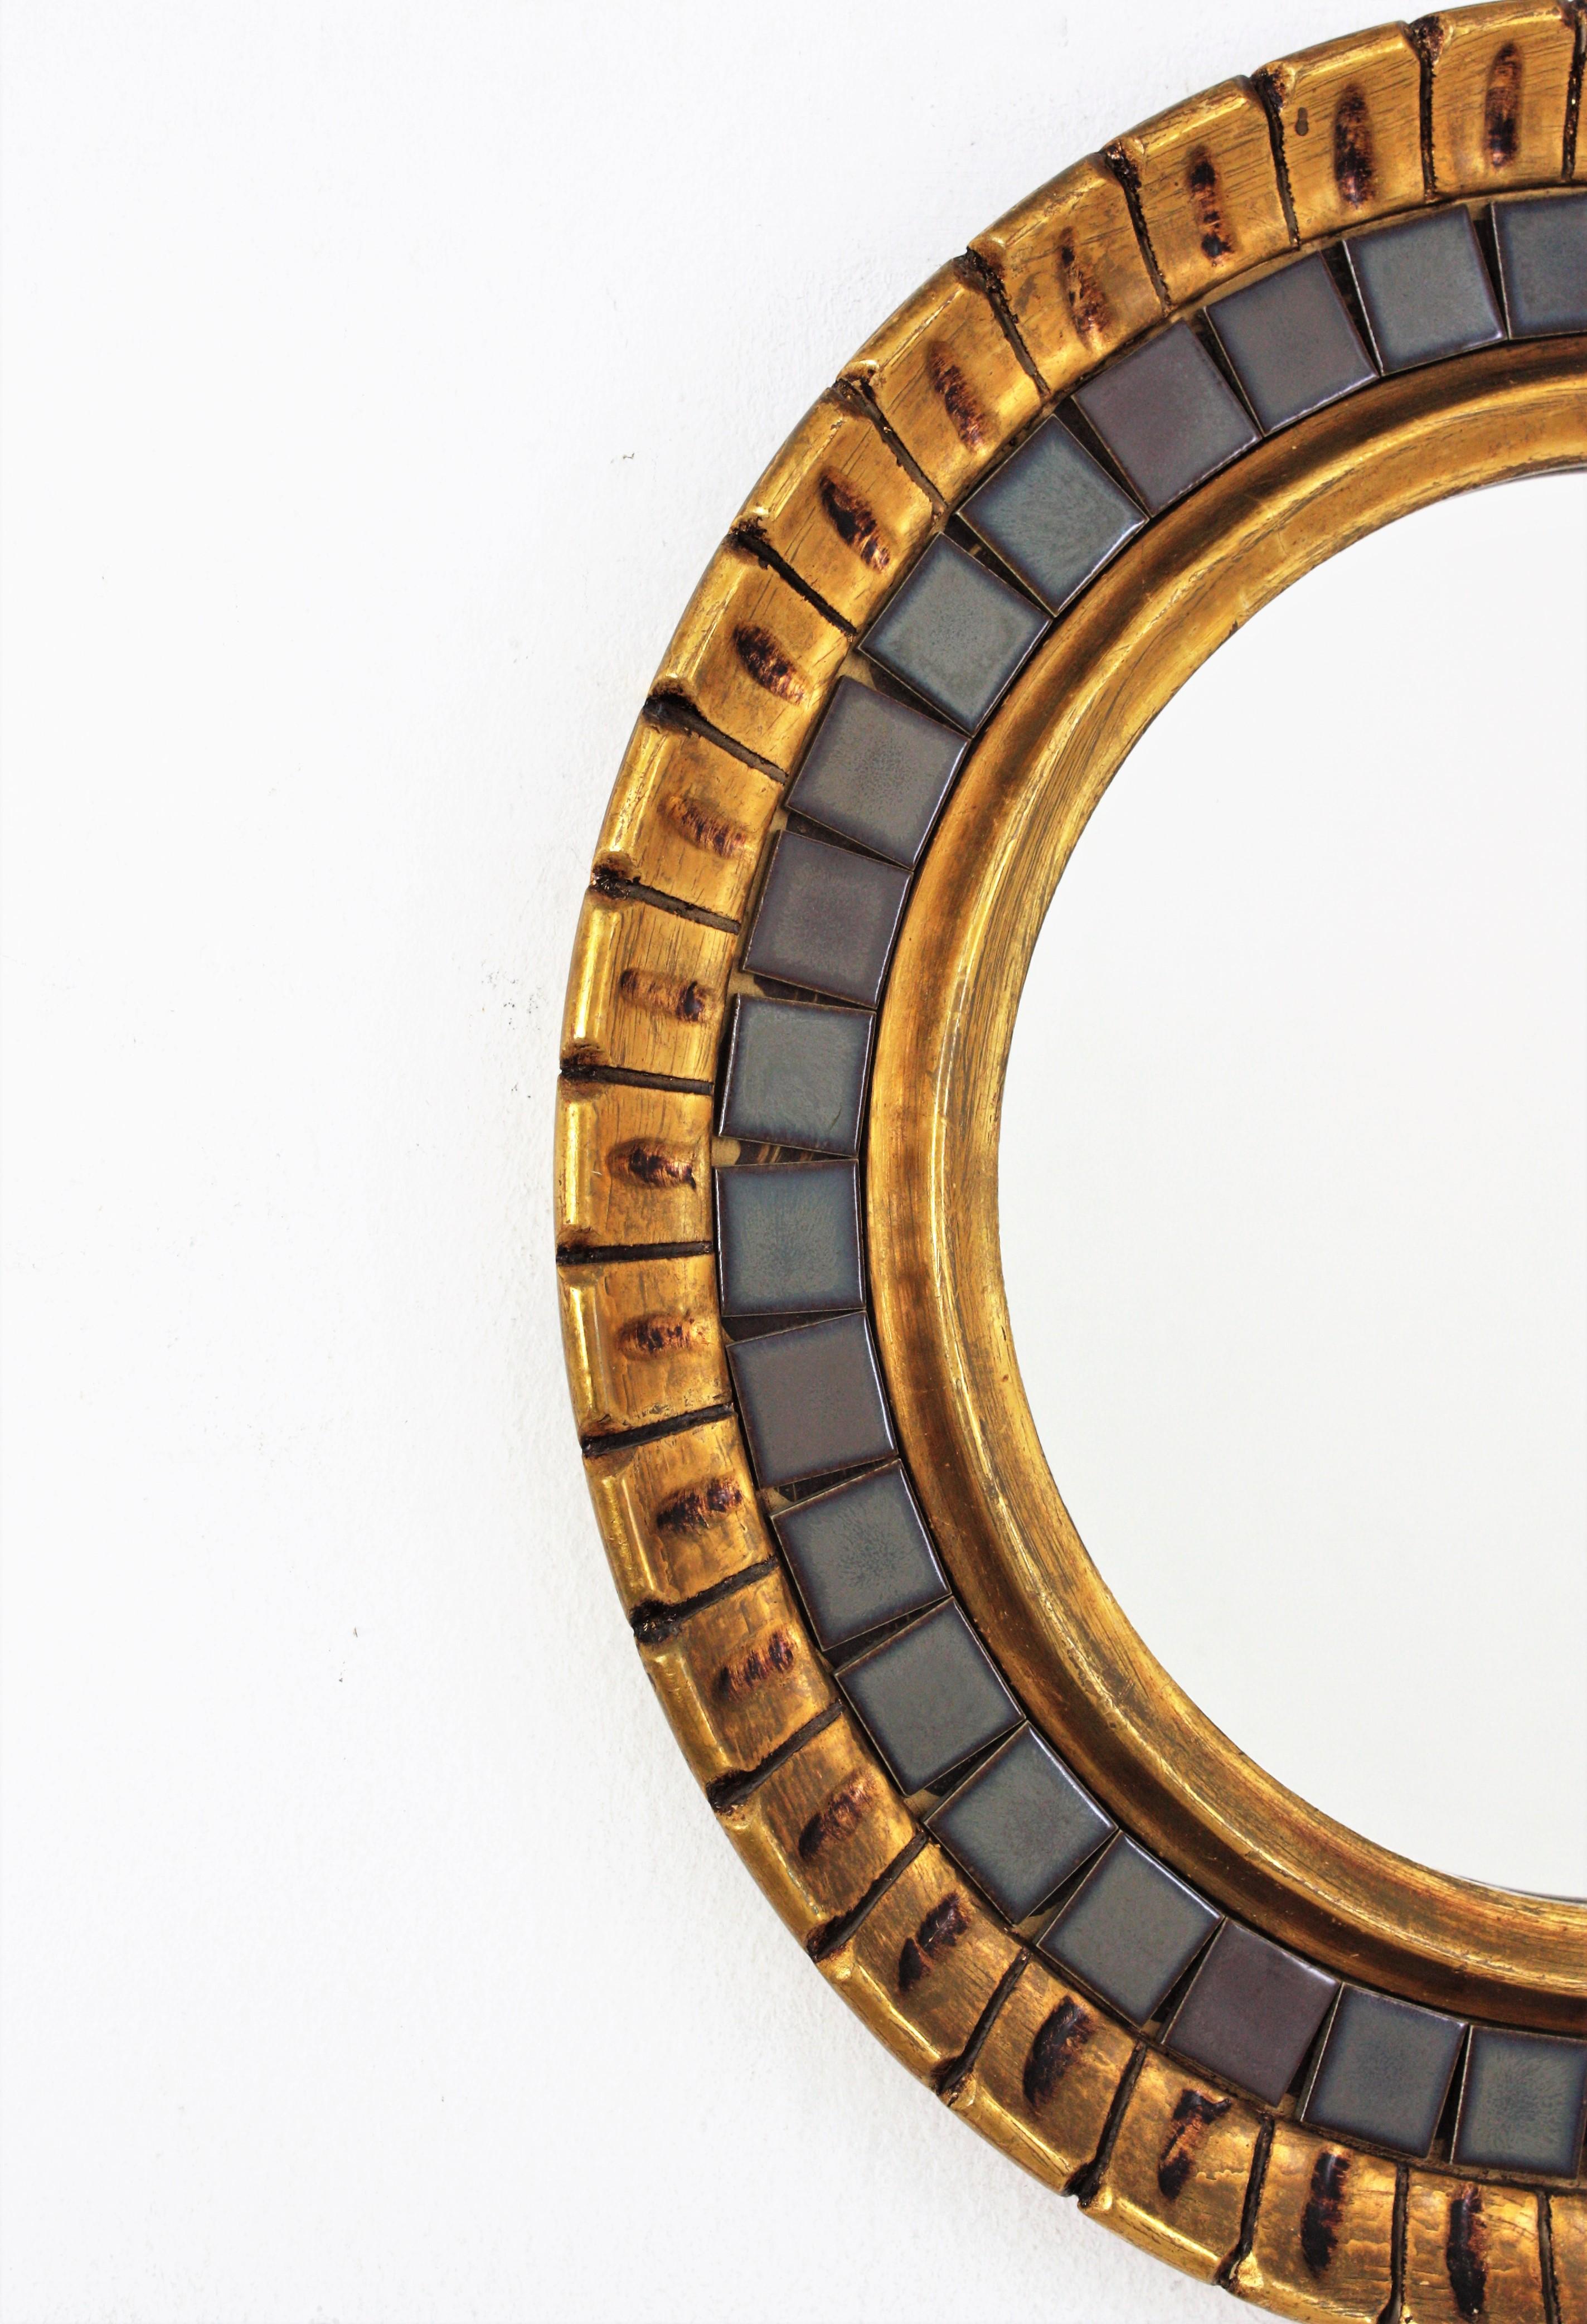 Midcentury Round Mirror, Giltwood and Ceramic In Good Condition For Sale In Barcelona, ES